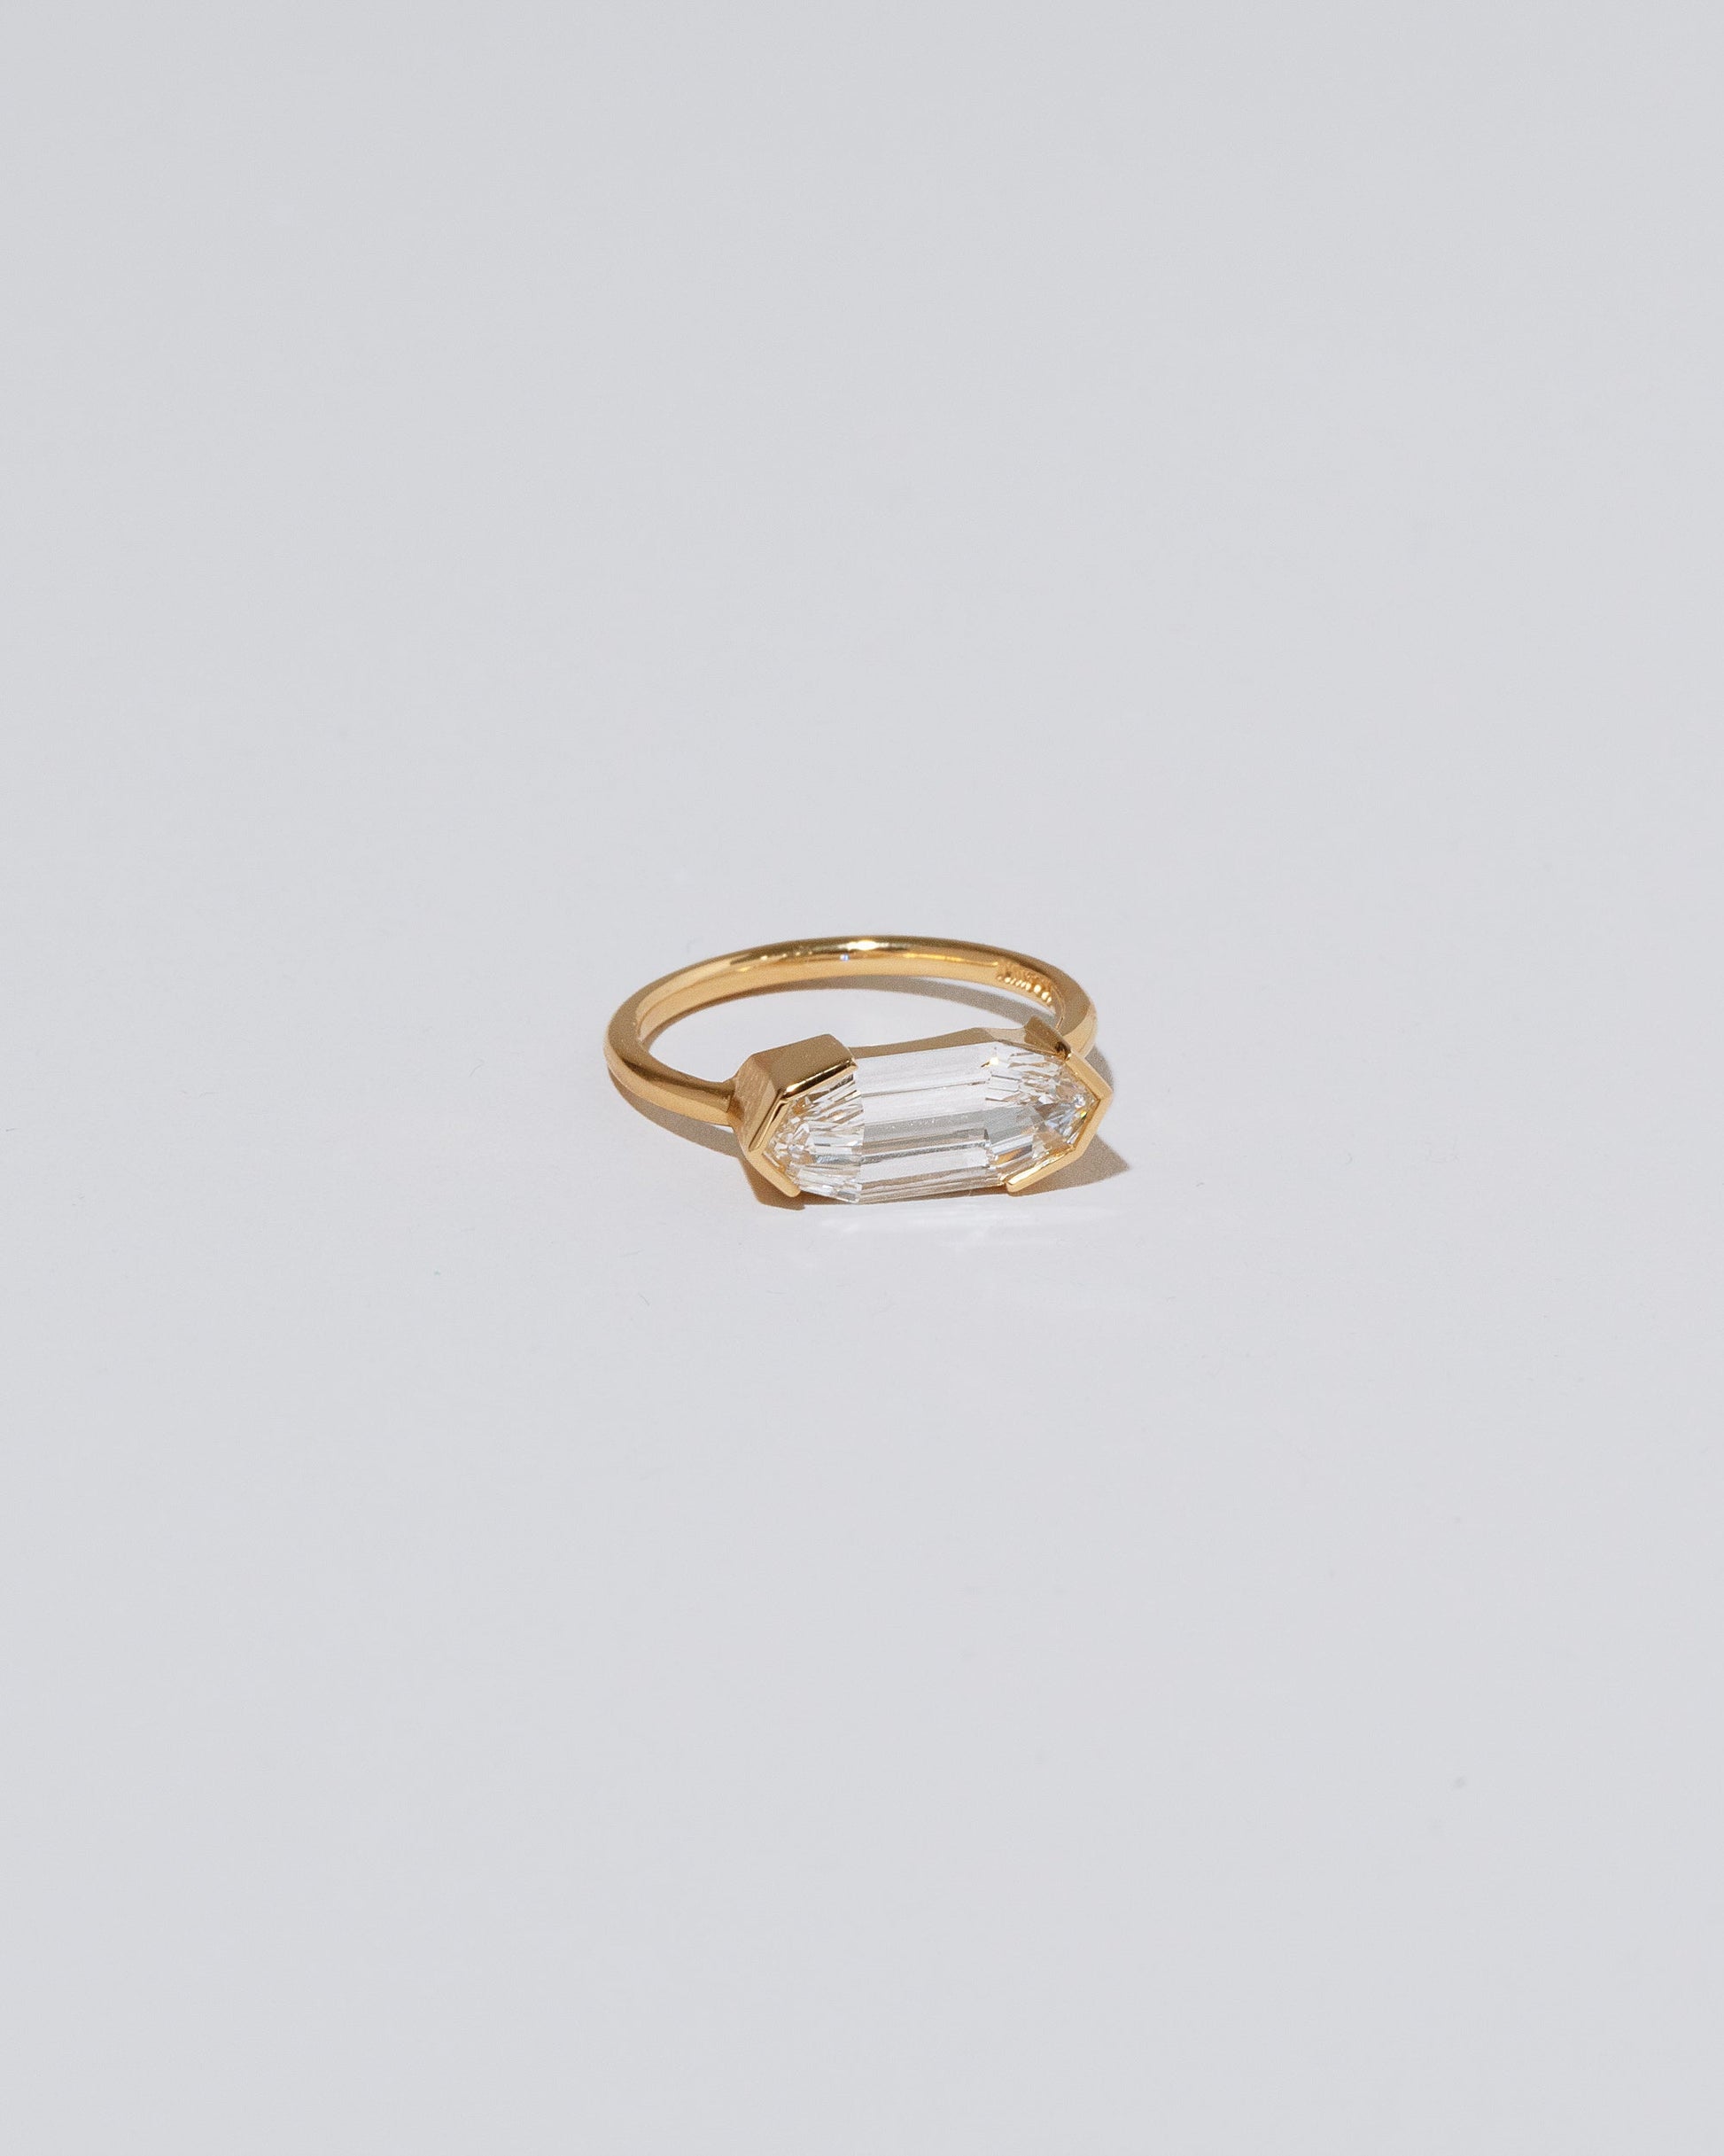 Product photo of the Relevé Ring on light color background